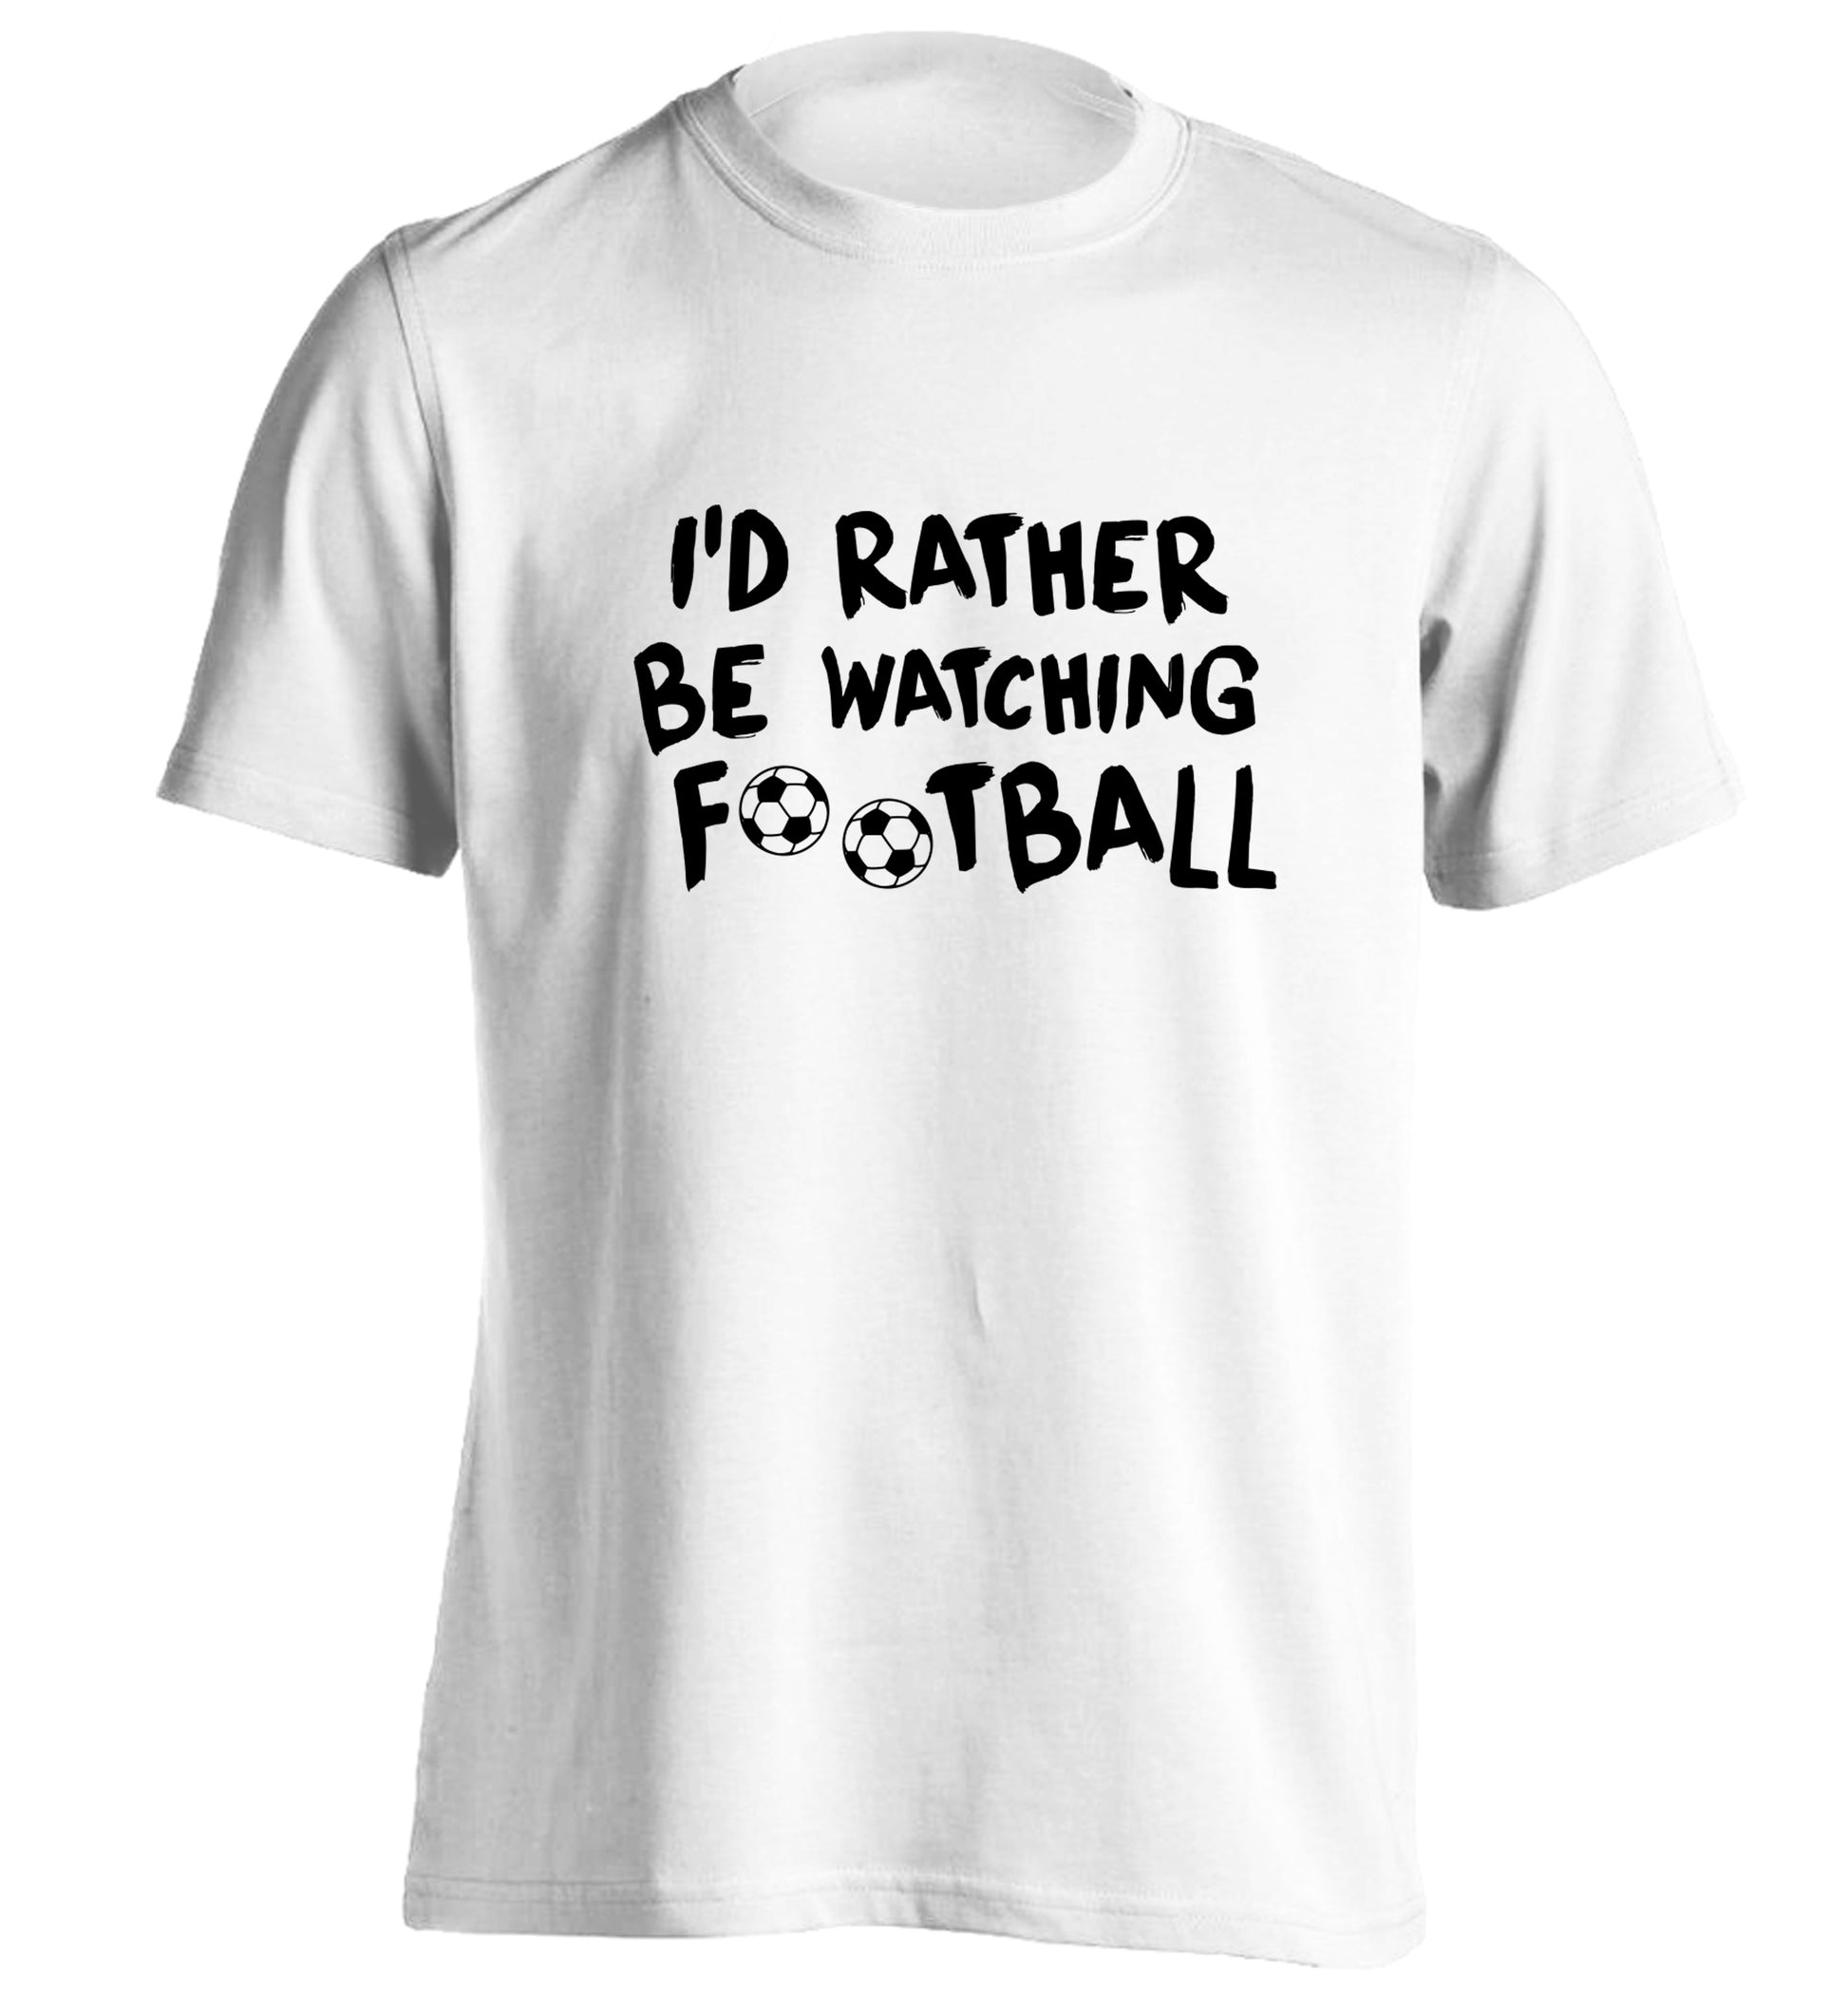 I'd rather be watching football adults unisexwhite Tshirt 2XL